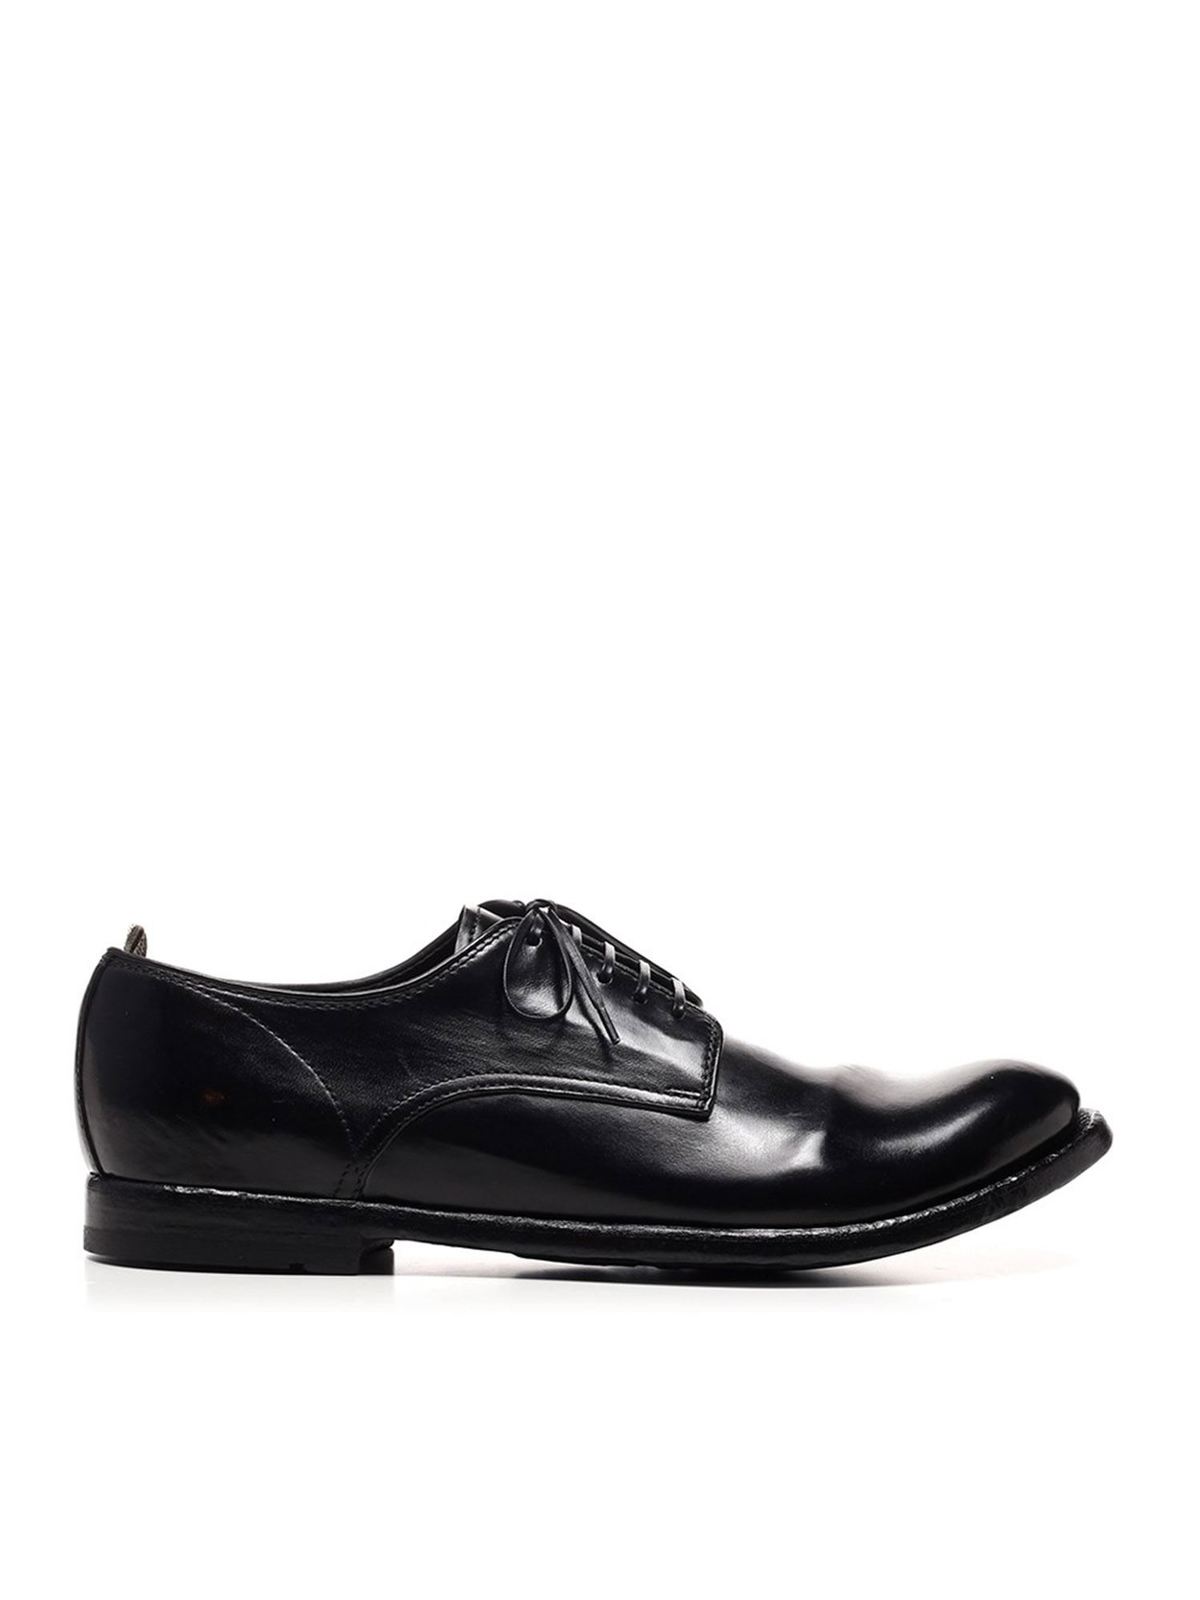 OFFICINE CREATIVE ANATOMIA 60 SHOES IN BLACK